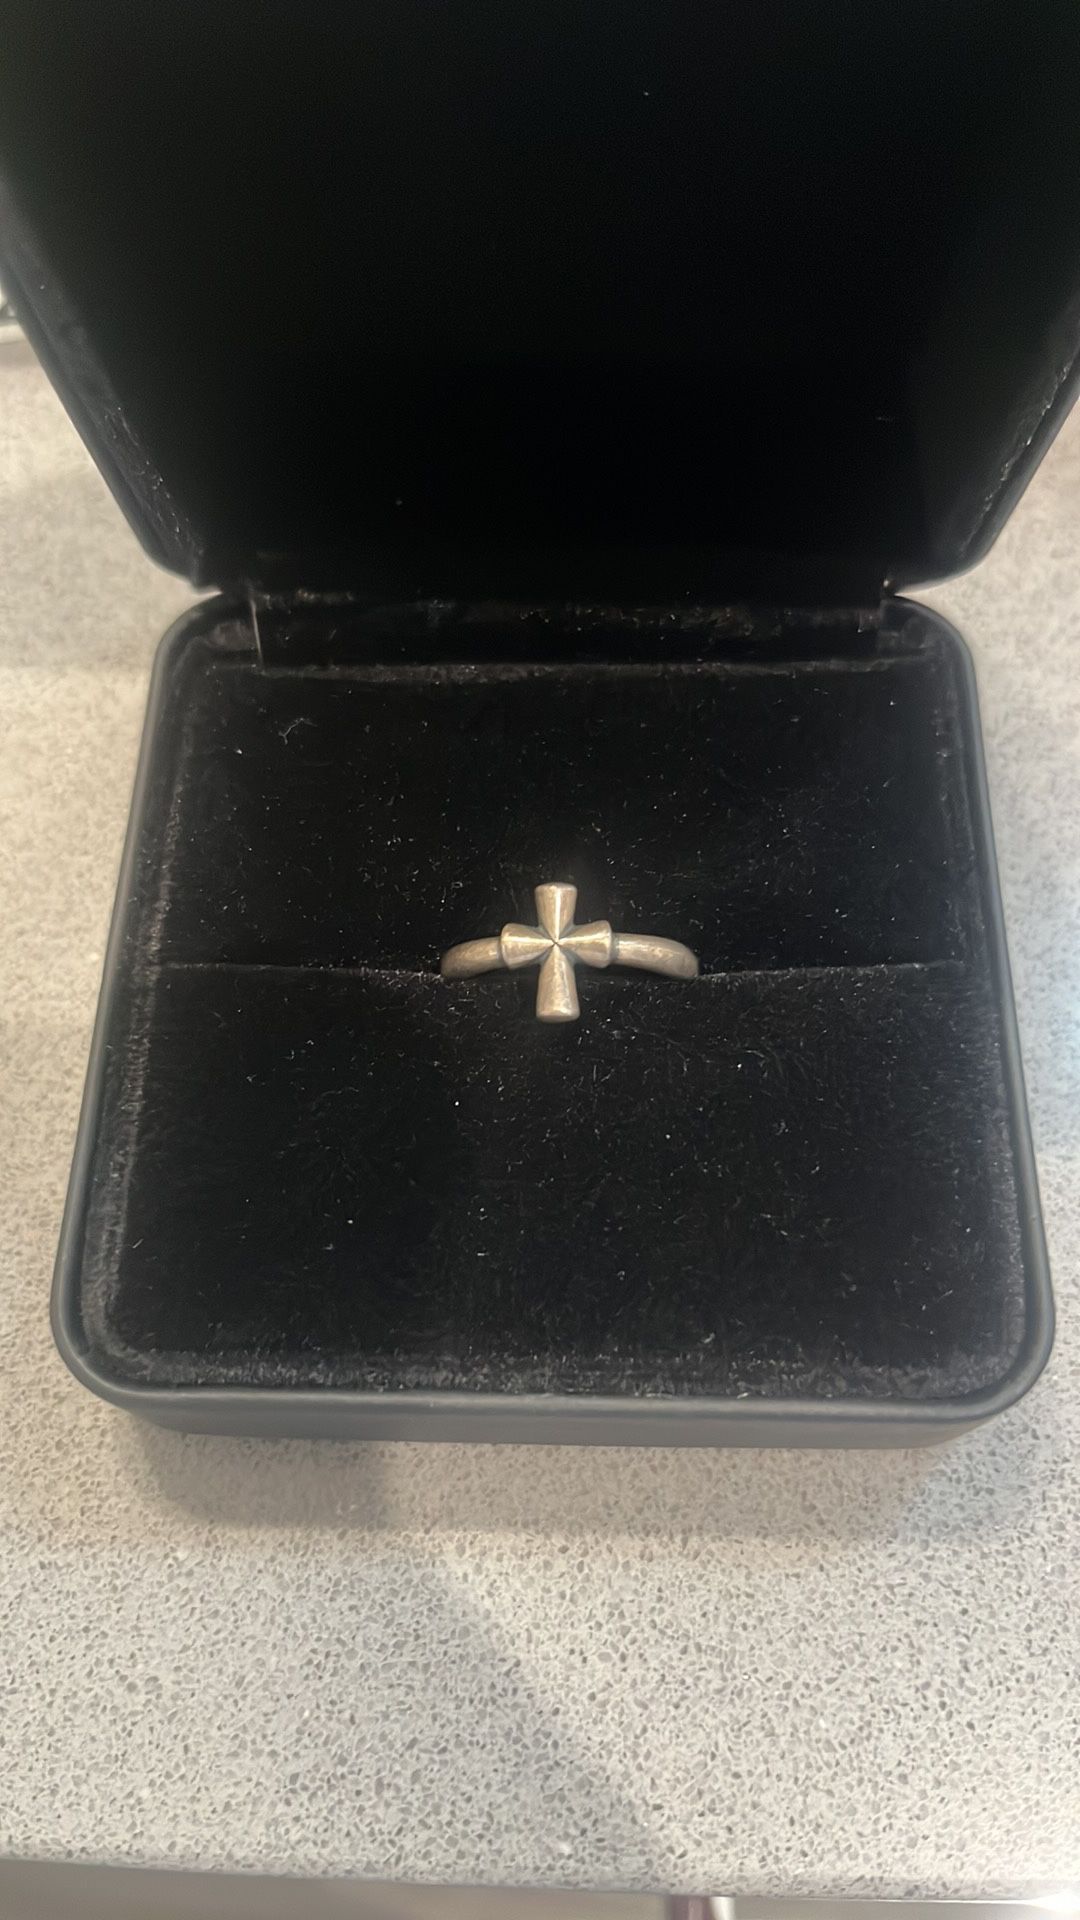 James Avery 925 Sterling Silver Cross Ring